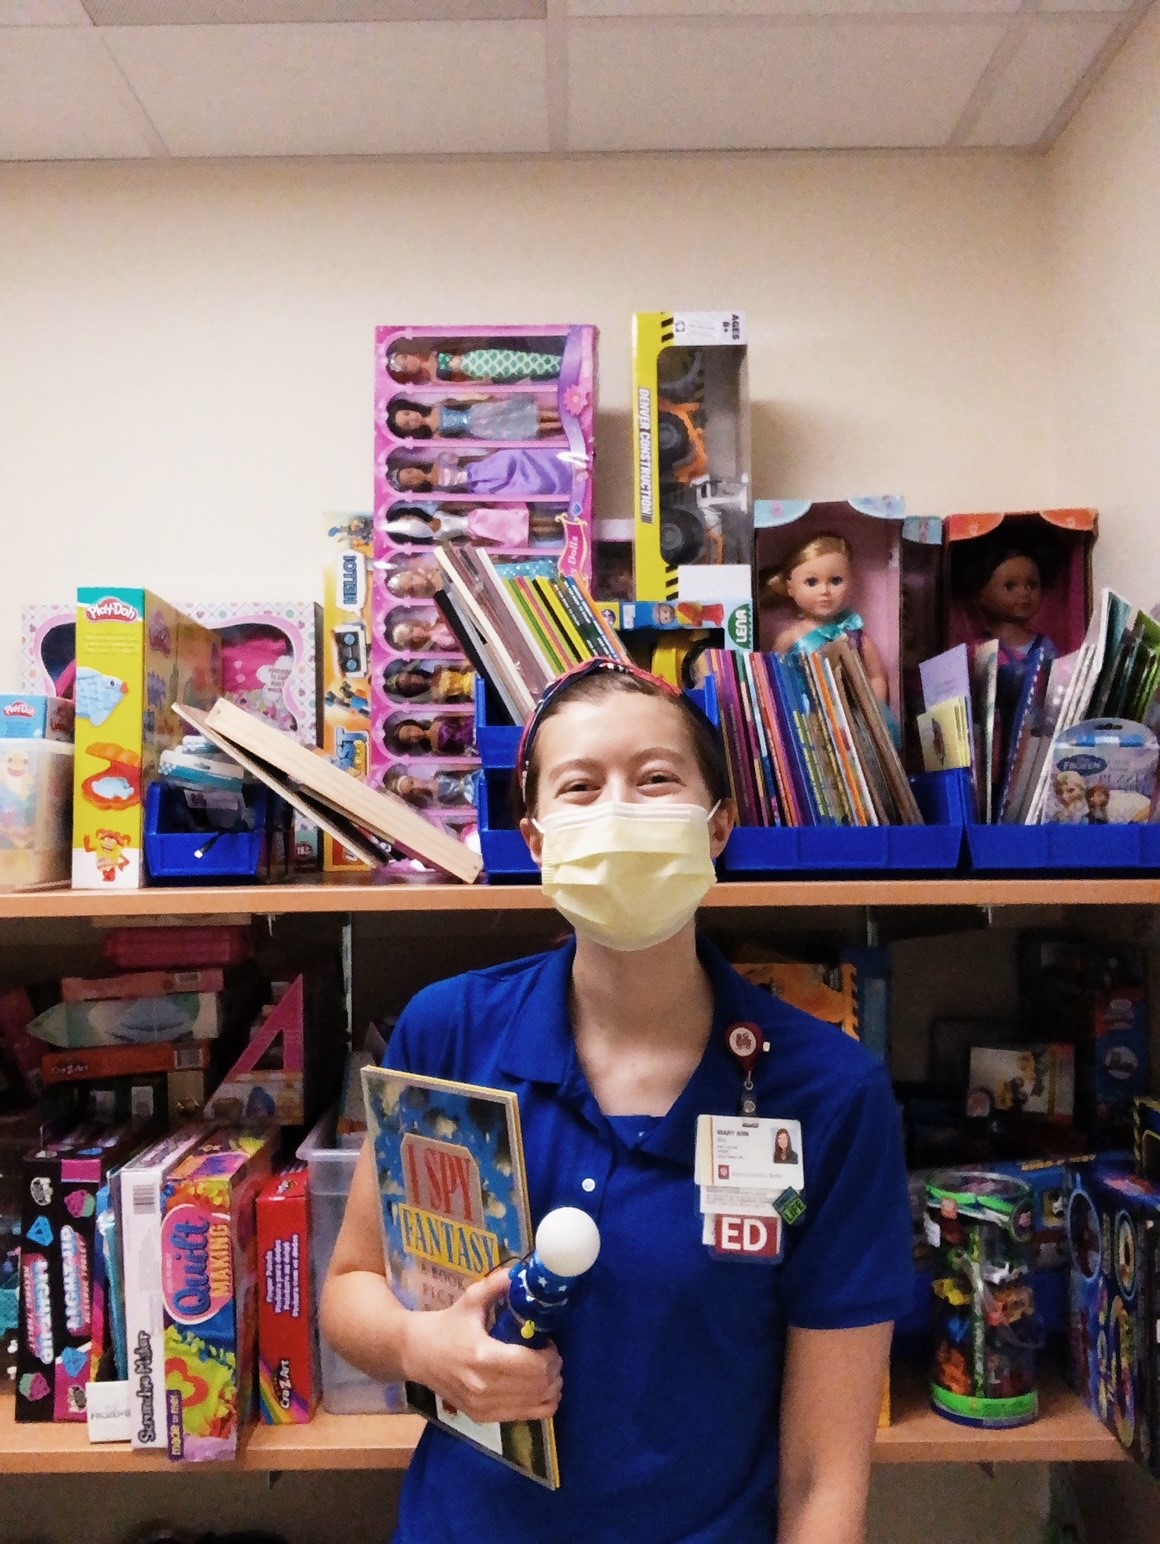 Mary Ann Gill on last day of internship posing with some of her favorite distraction tools (1)